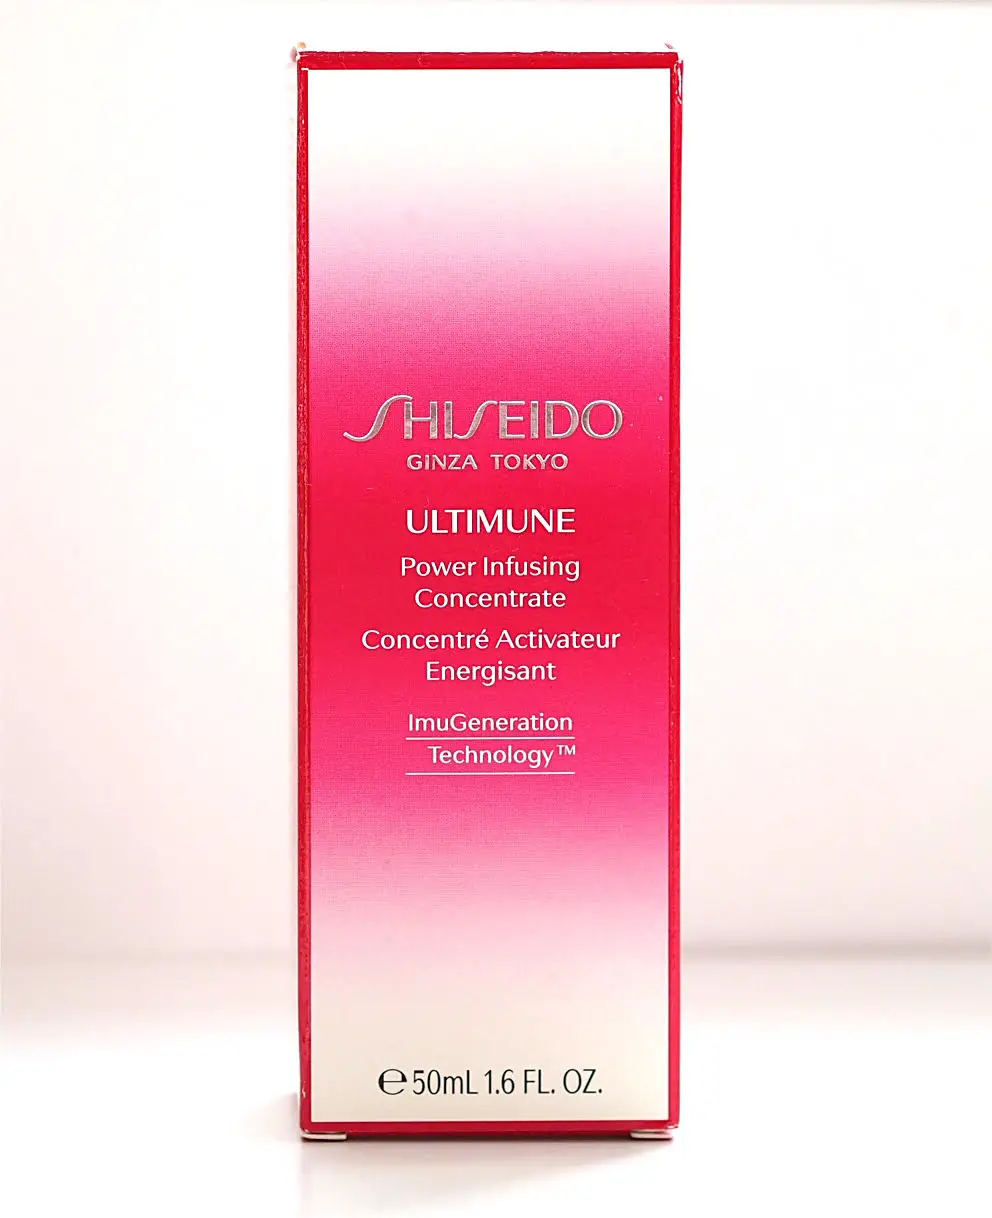 Shiseido ultimune power infusing concentrate. Ultimune концентрат шисейдо Power infusing. Концентрат Shiseido Ultimune Power infusing Concentrate. Shiseido 2023 Box. Shiseido Ginza Tokyo.